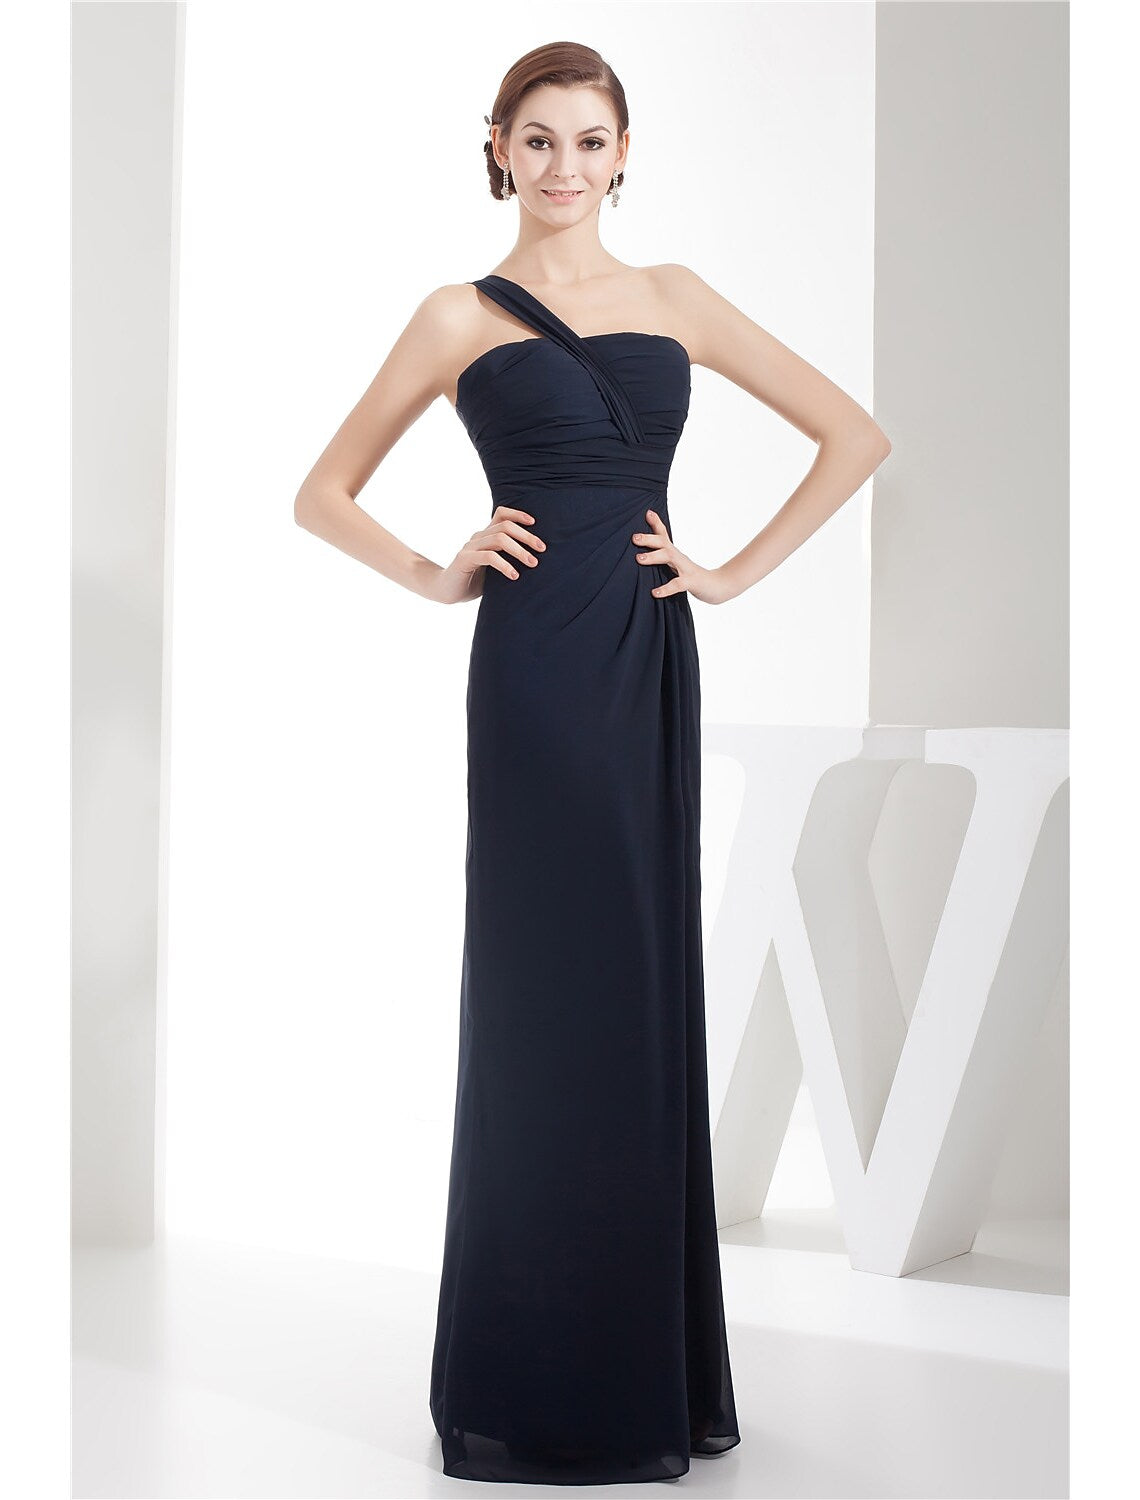 Evening Gown Dress Wedding Floor Length Sleeveless One Shoulder Chiffon with Ruched